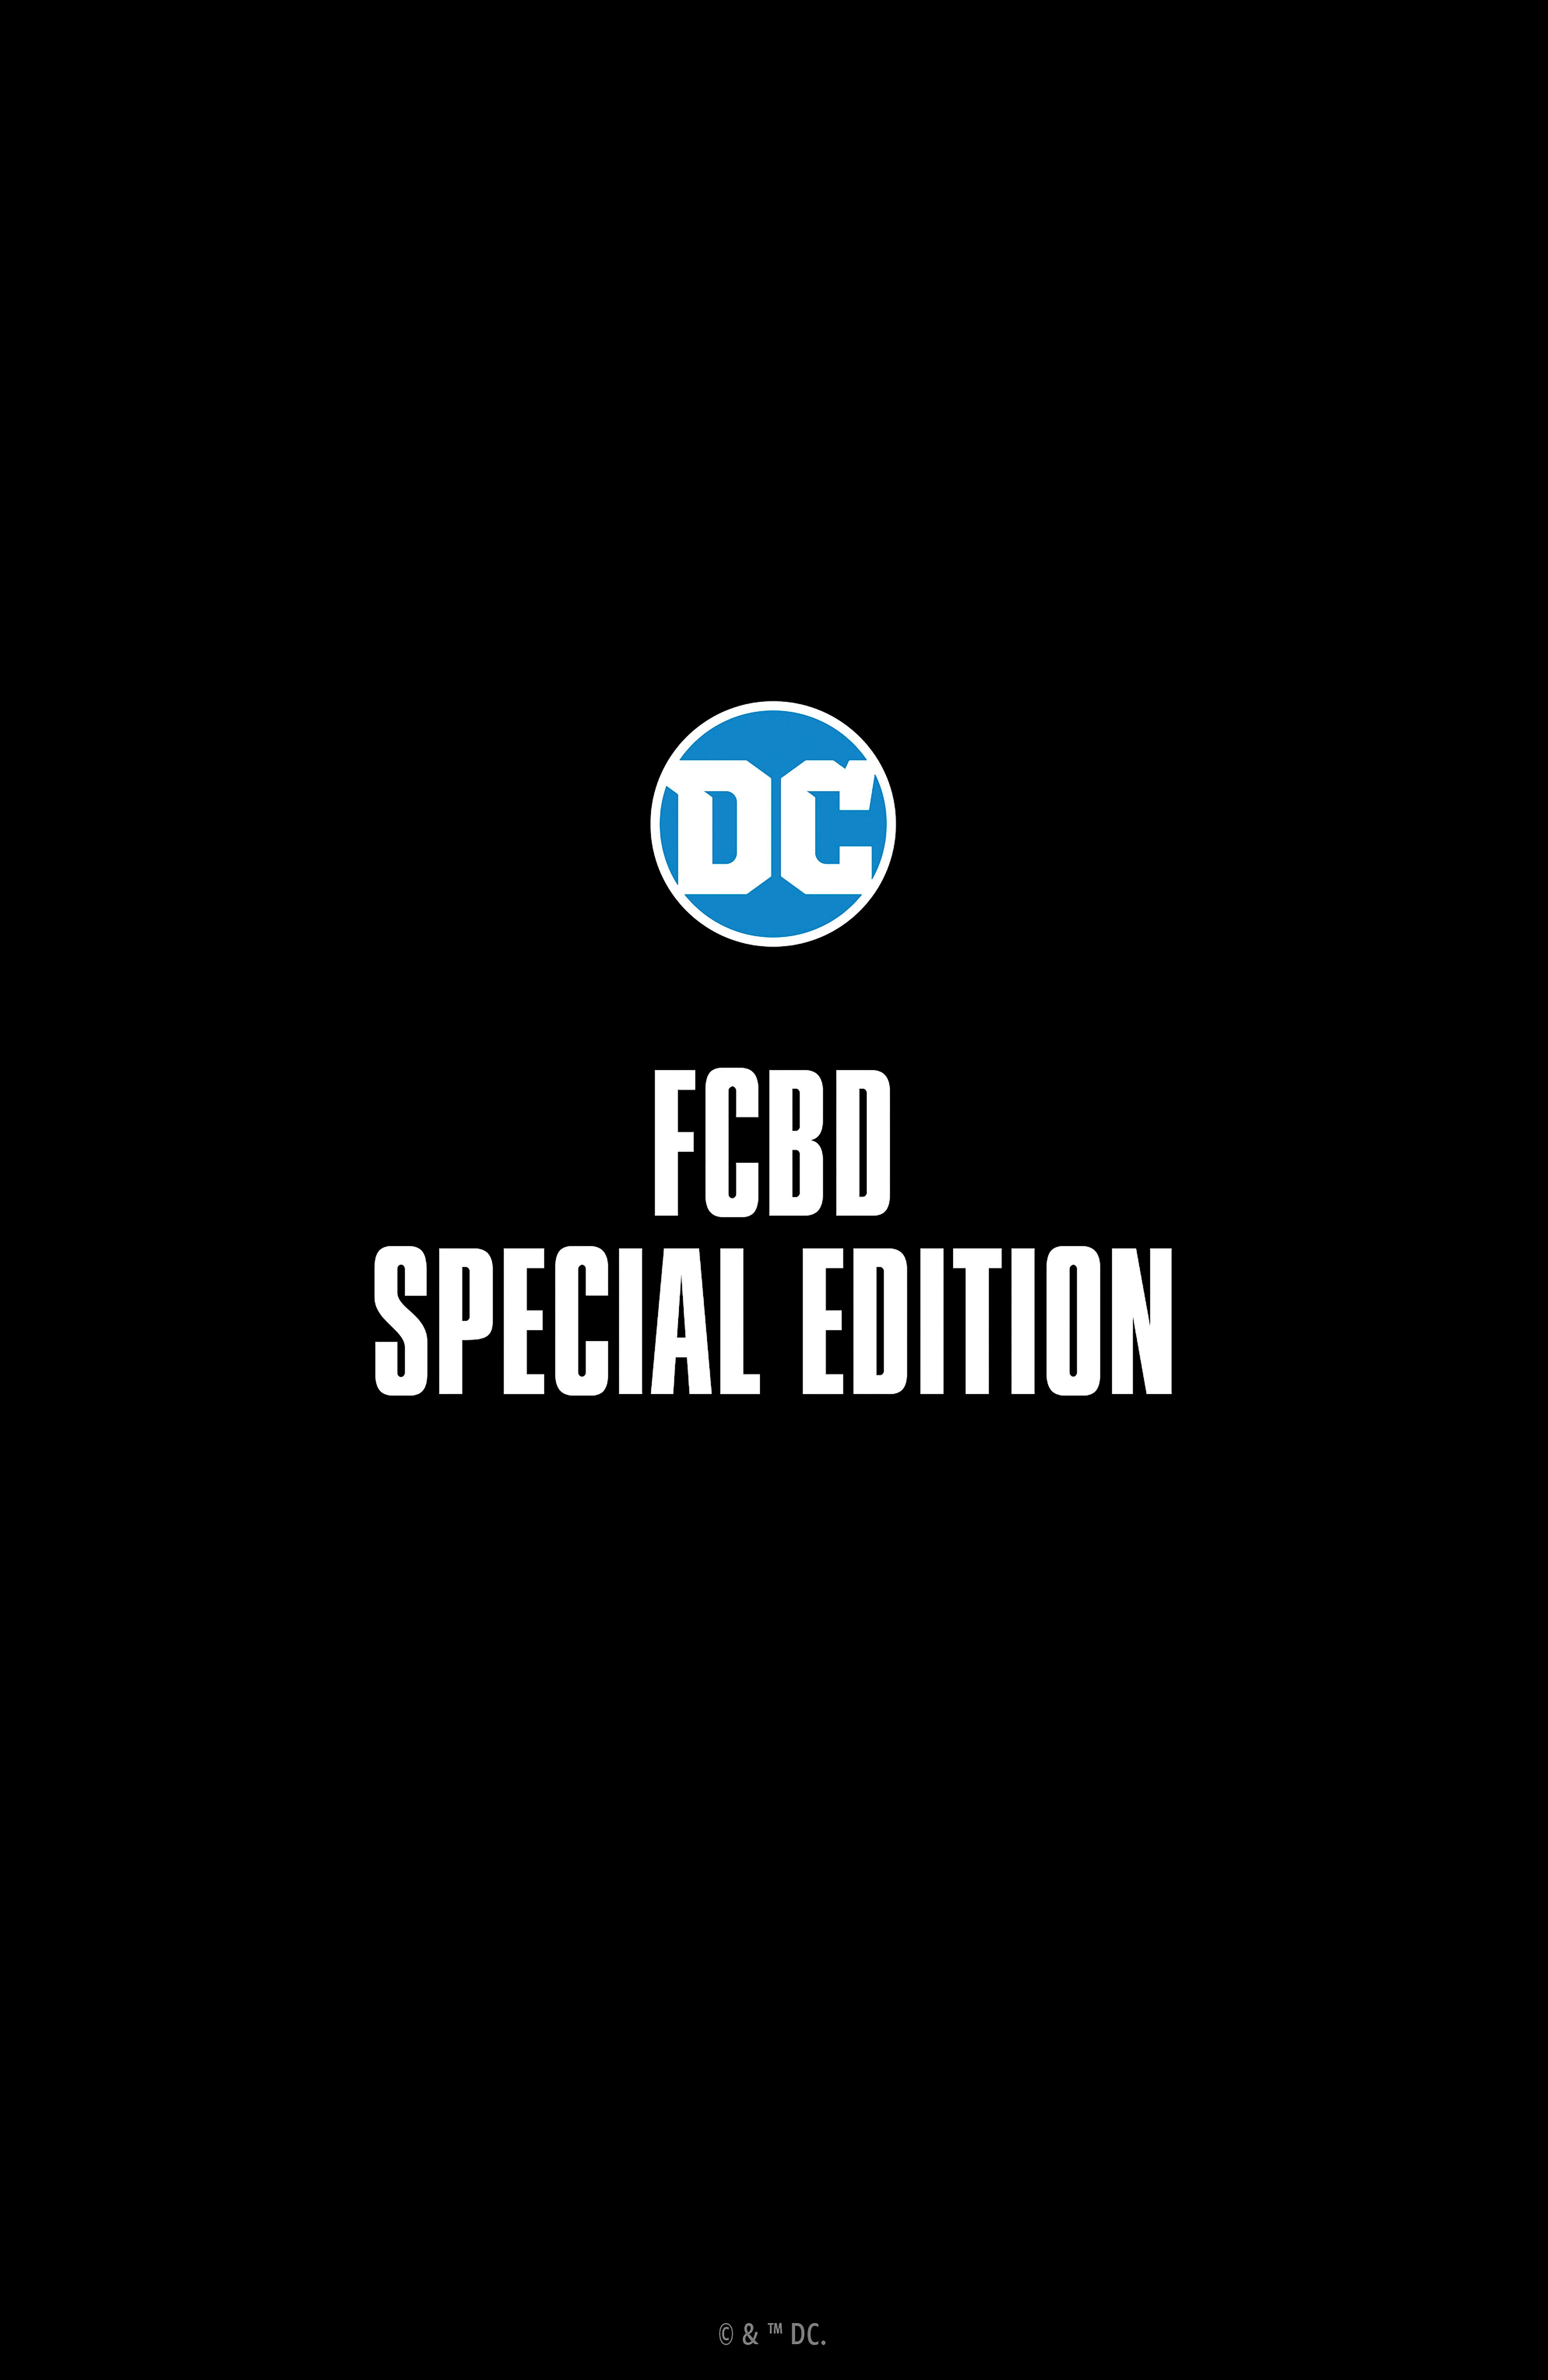 “A Story 30 Years in the Making”: DC Teases “Major Event” that Will Change the DCU Forever